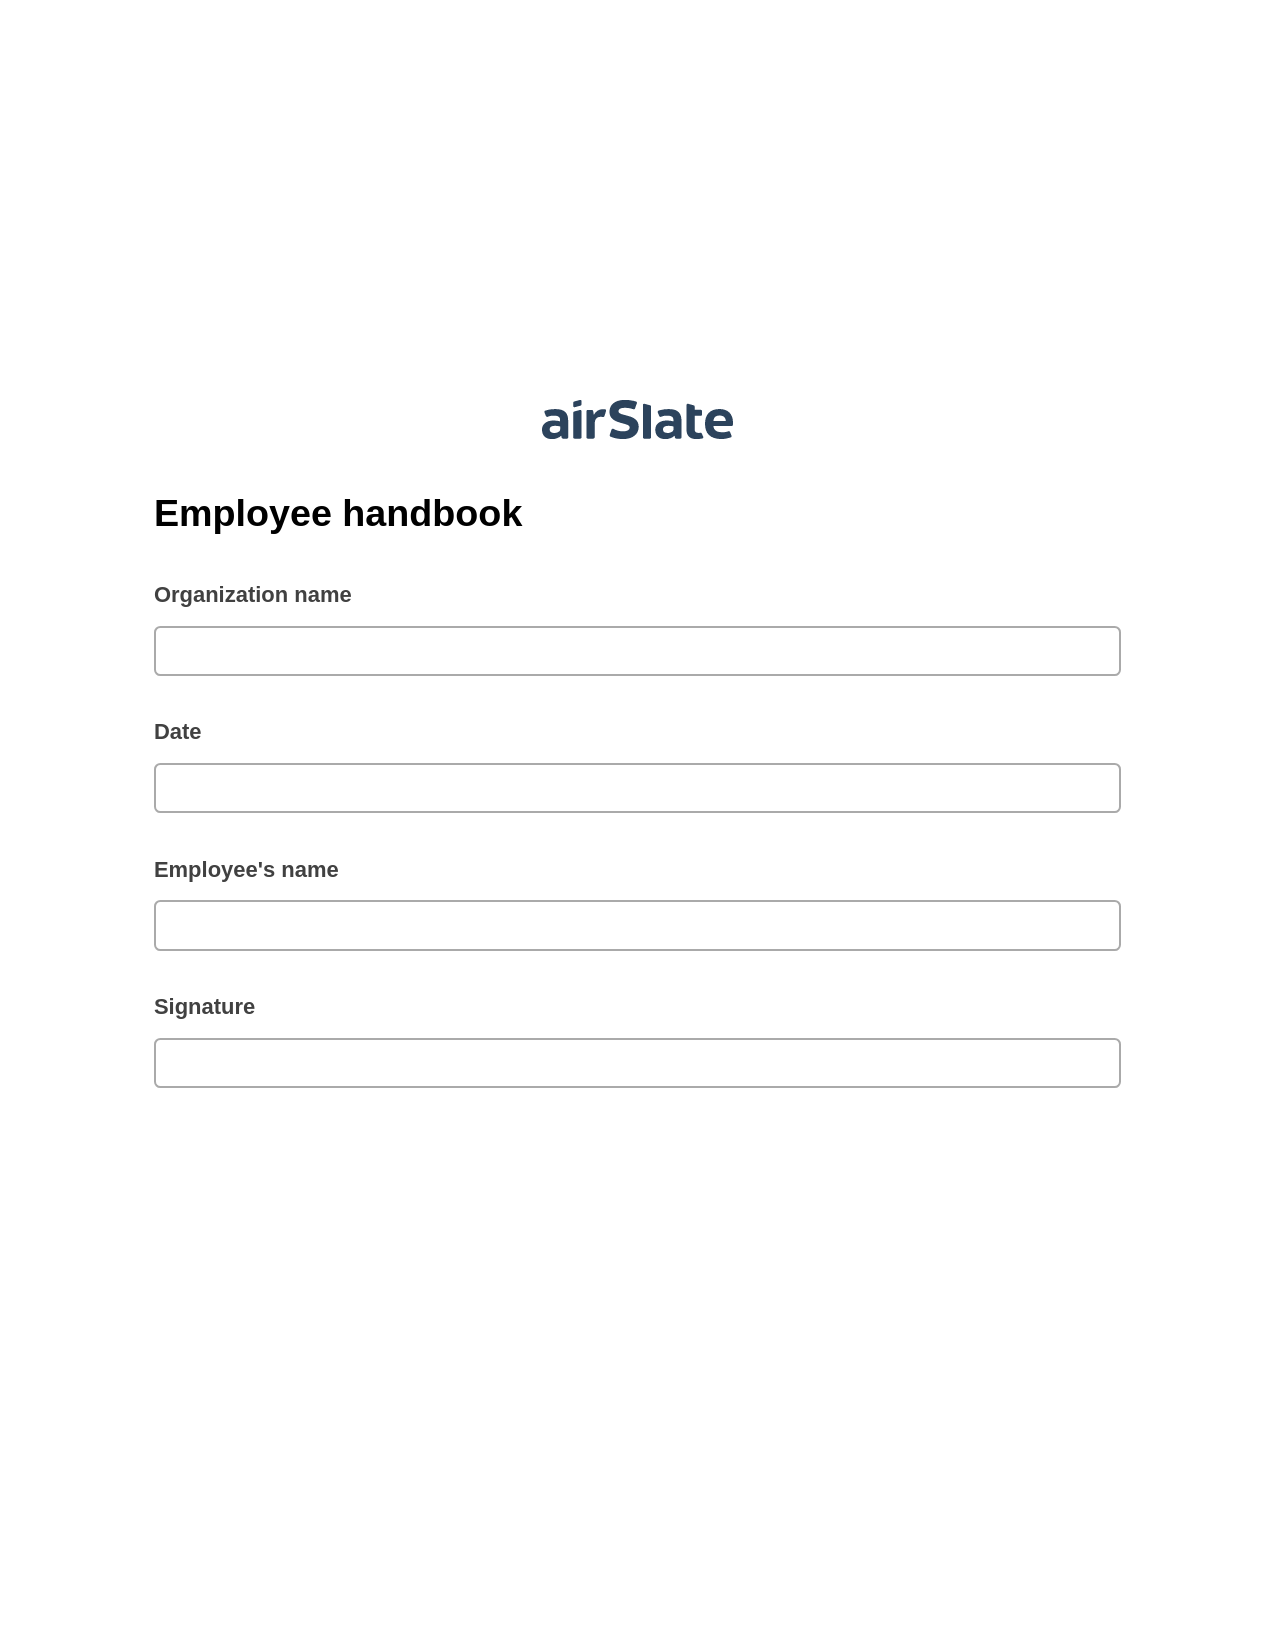 Multirole Employee handbook Pre-fill Dropdowns from Office 365 Excel Bot, Send Mailchimp Campaign Bot, Archive to SharePoint Folder Bot